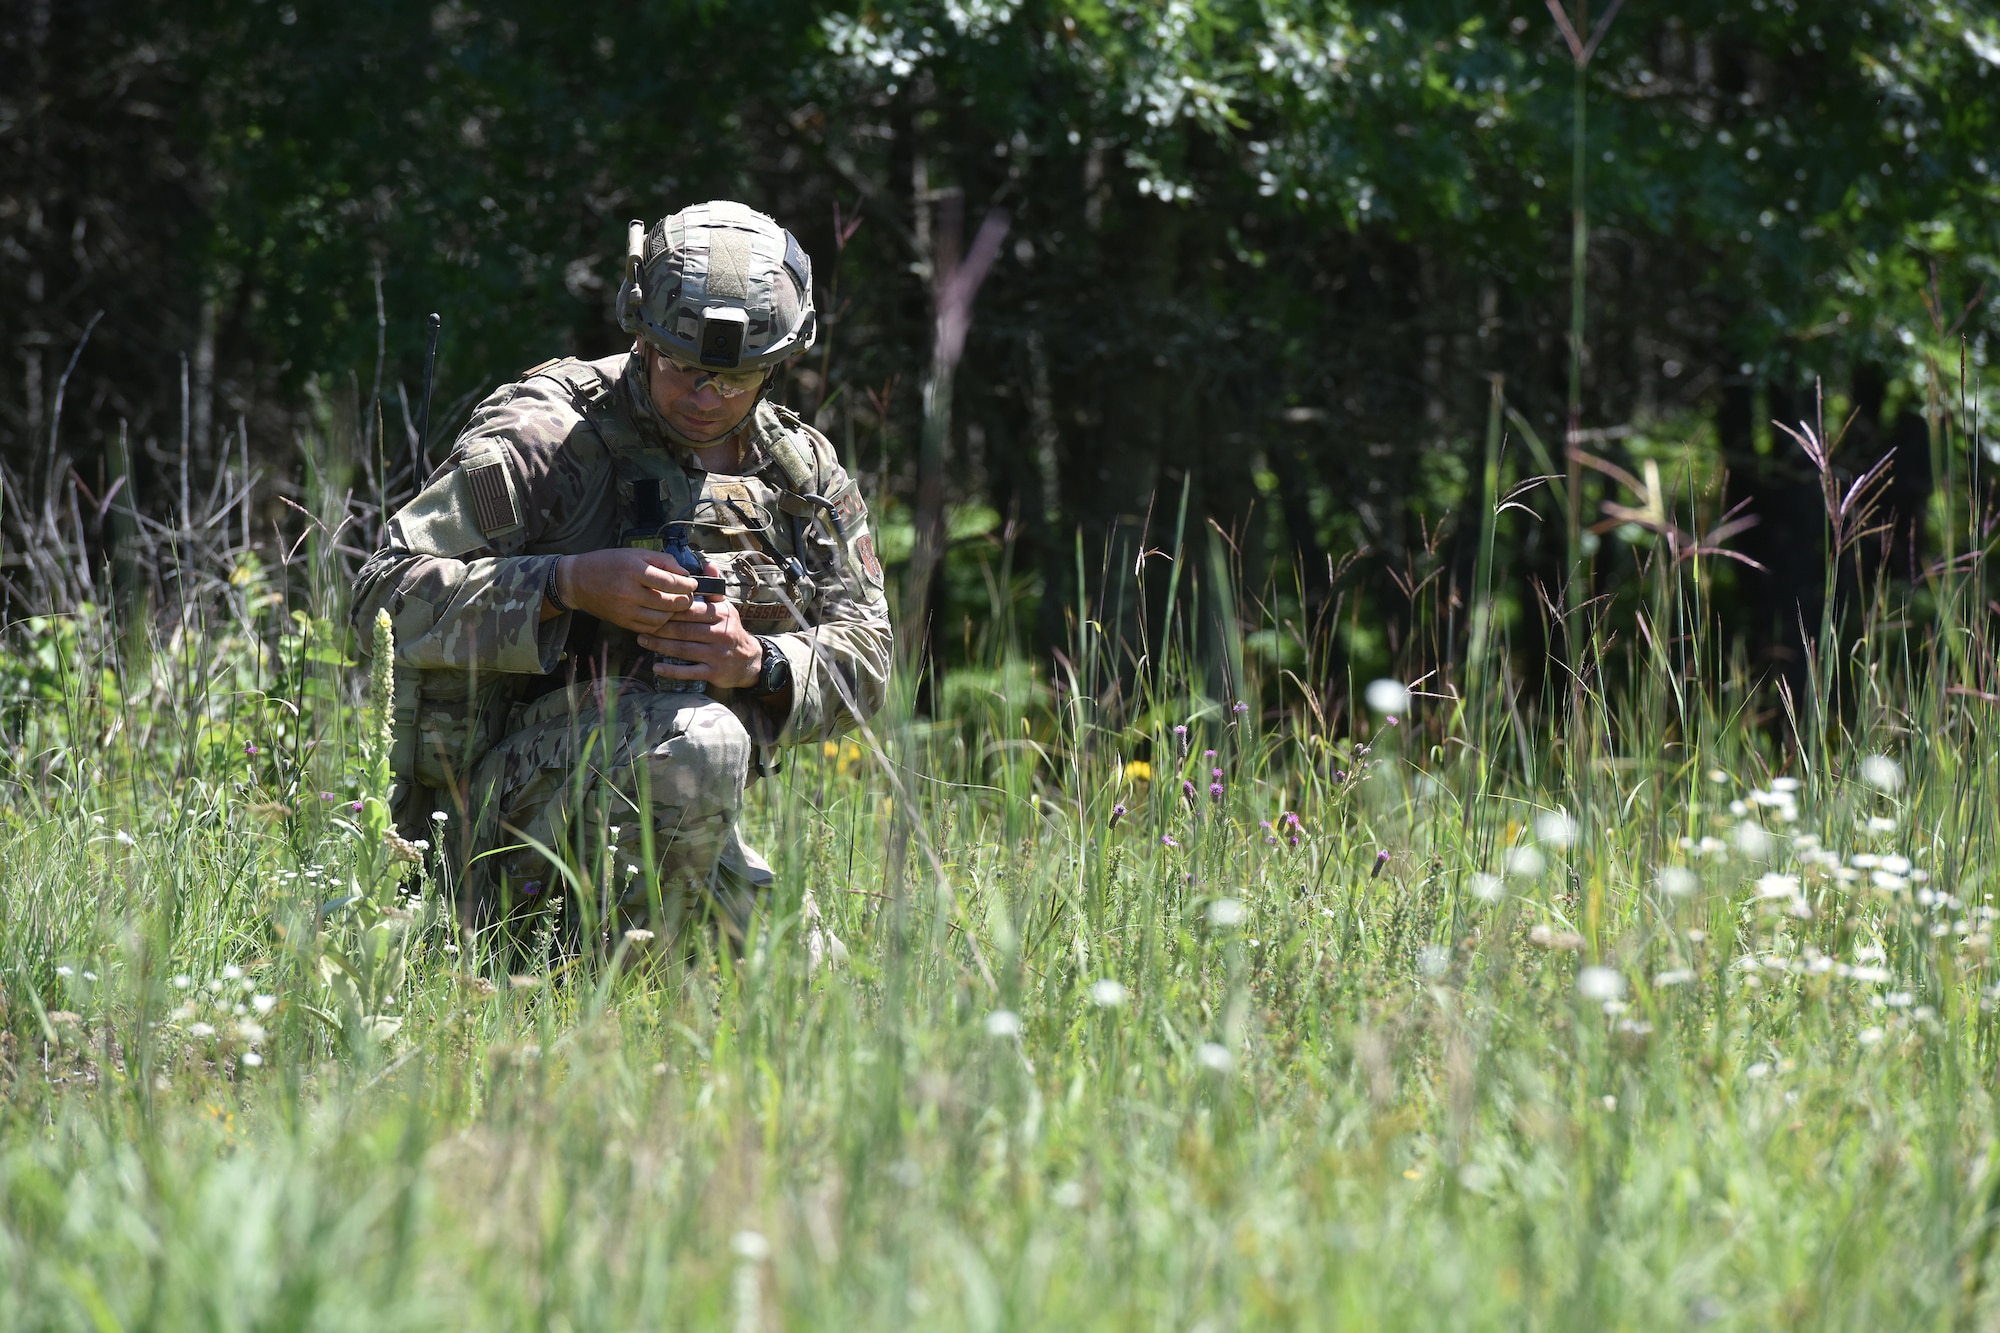 An Air National Guard Explosive Ordnance Disposal technician participates in a field training exercise at Camp Ripley Training Center, Minnesota, July 20-24, 2020.